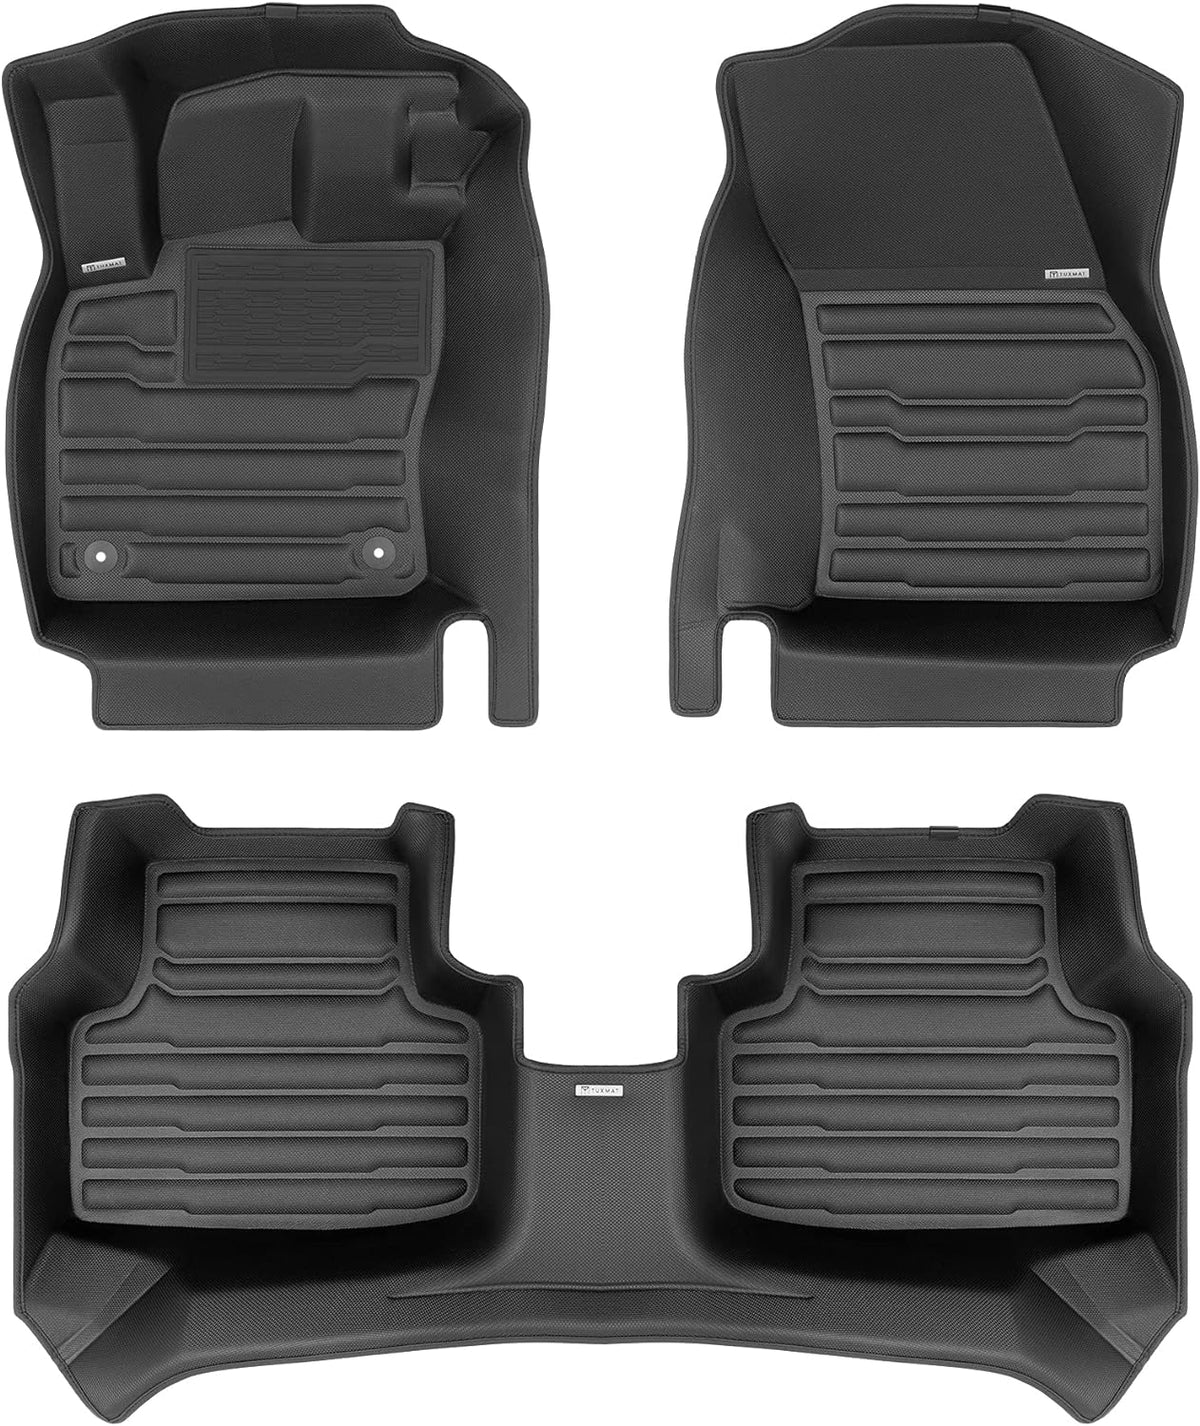 TuxMat 8675 - for Volkswagen Taos 2022-2024 Models - Custom Car Mats - Maximum Coverage, All Weather, Laser Measured - This Full Set Includes 1st and 2nd Rows